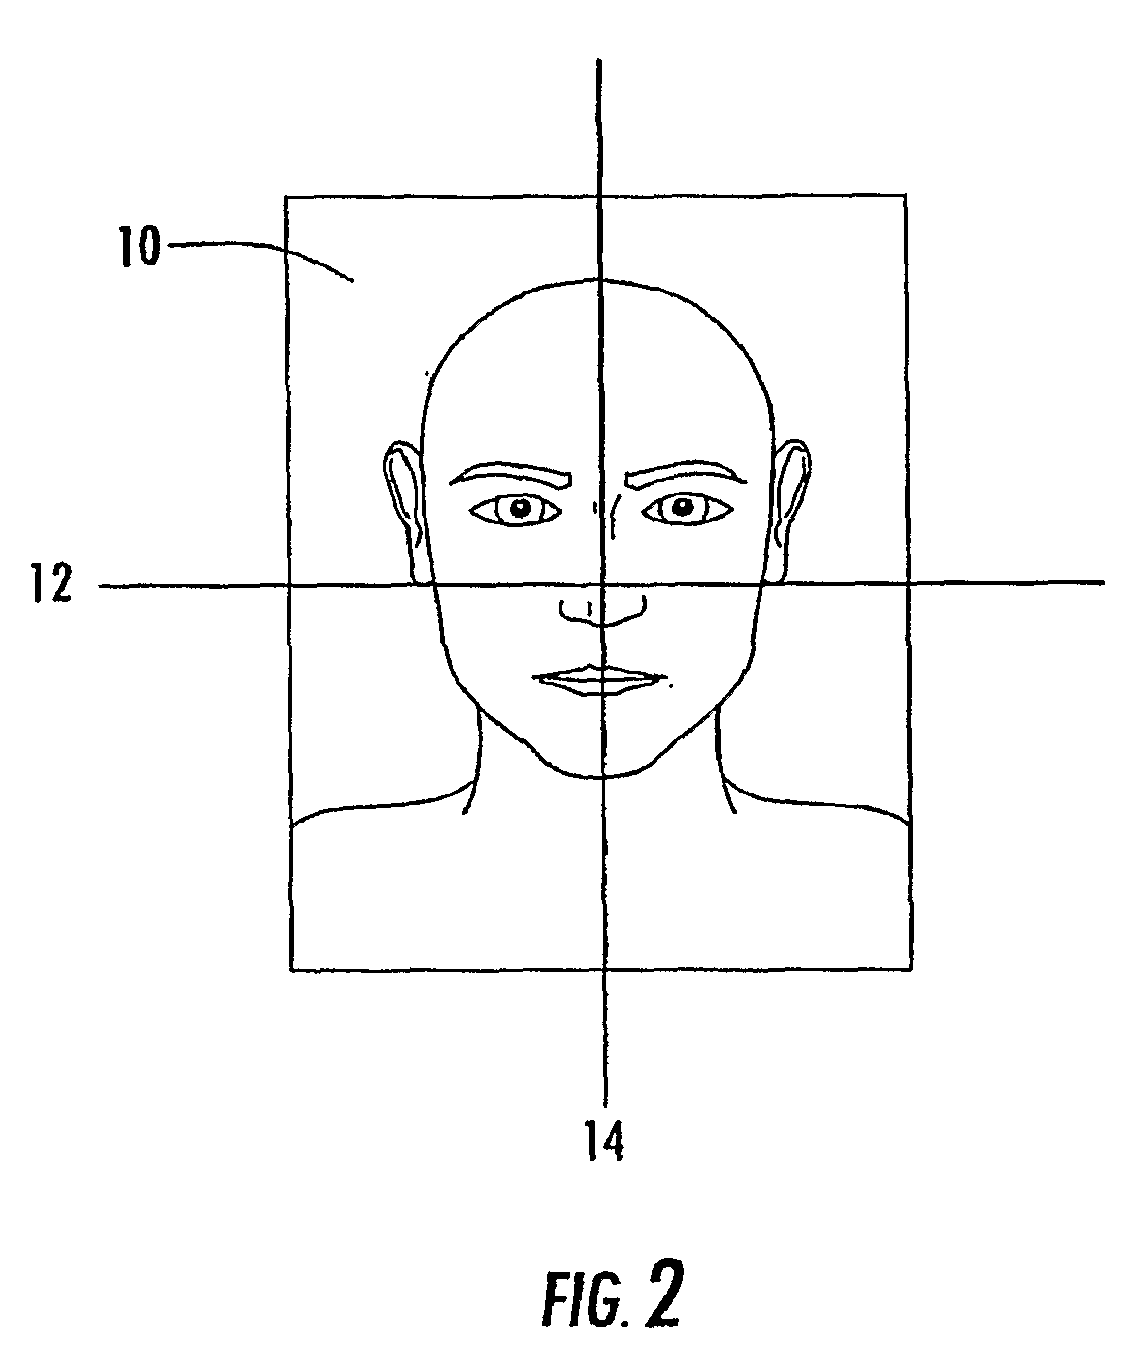 Apparatus for Reducing Brain and Cervical Spine Injury Due to Rotational Movement